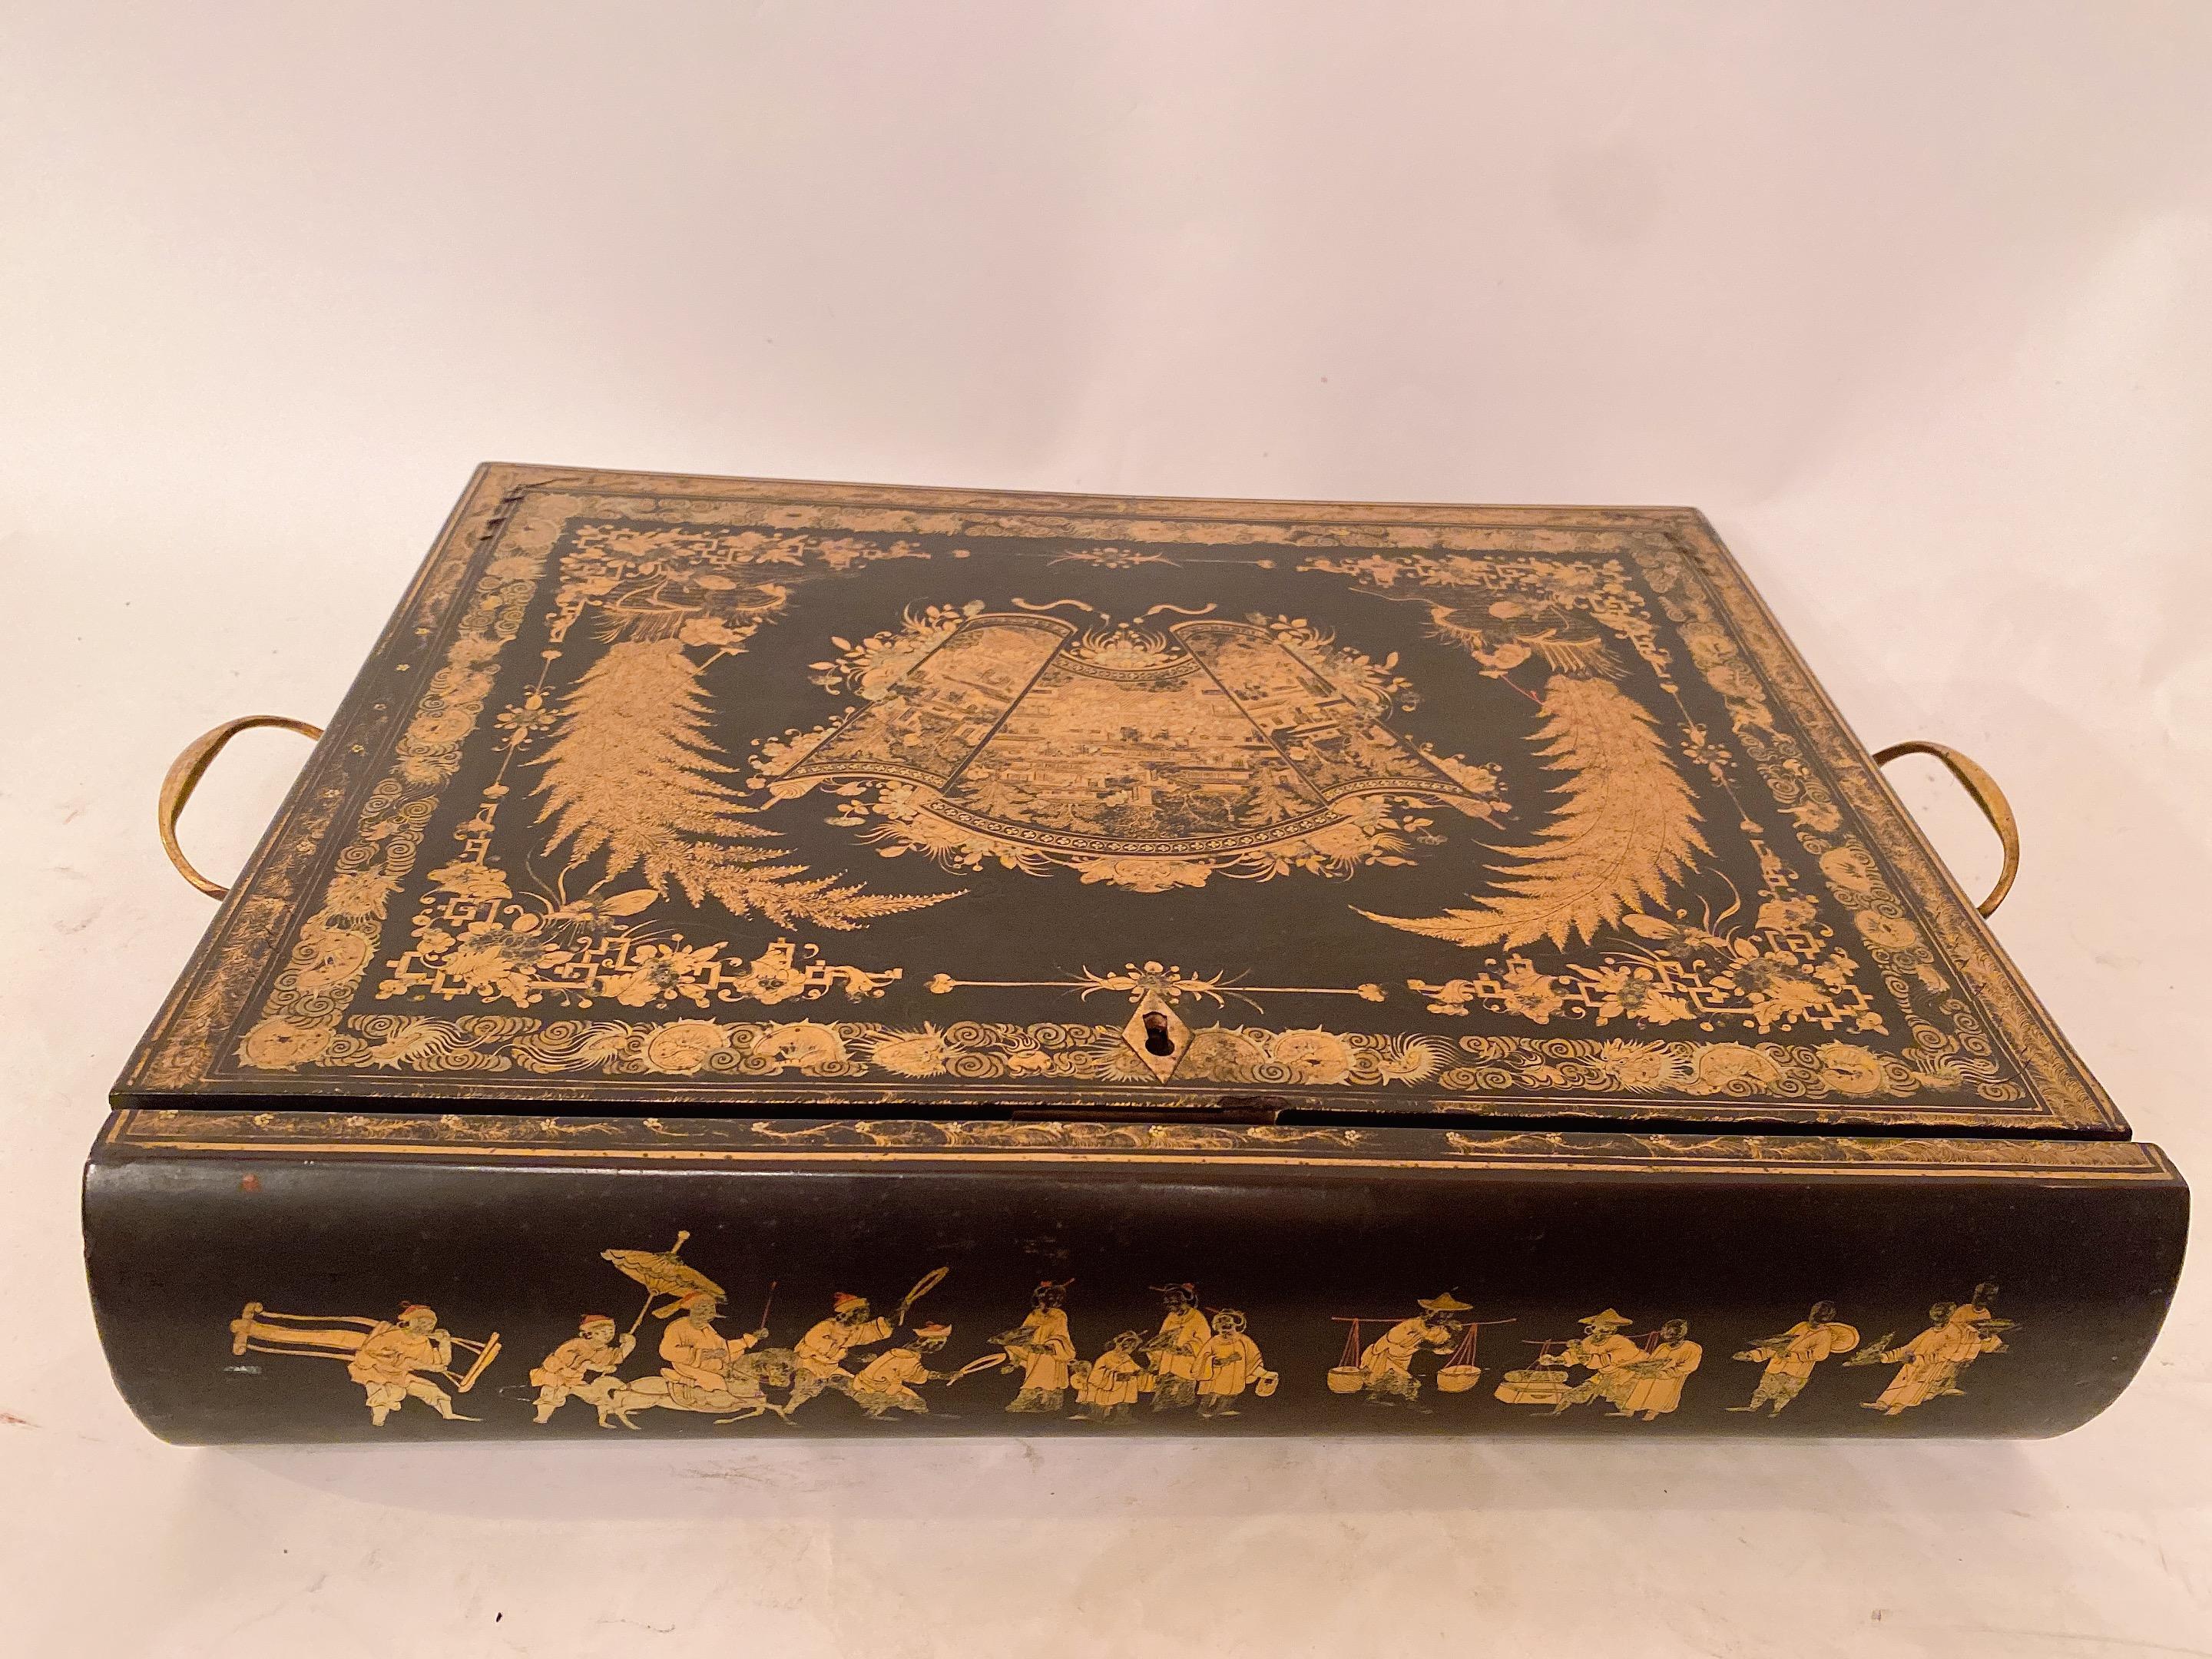 A truly rare beautiful and amazing piece. From the early 19th century of the Qing Dynasty in China, this gilt black lacquered writing box is decorated with the designs rich hand paint and gilt on black lacquer. Very good condition see pictures for